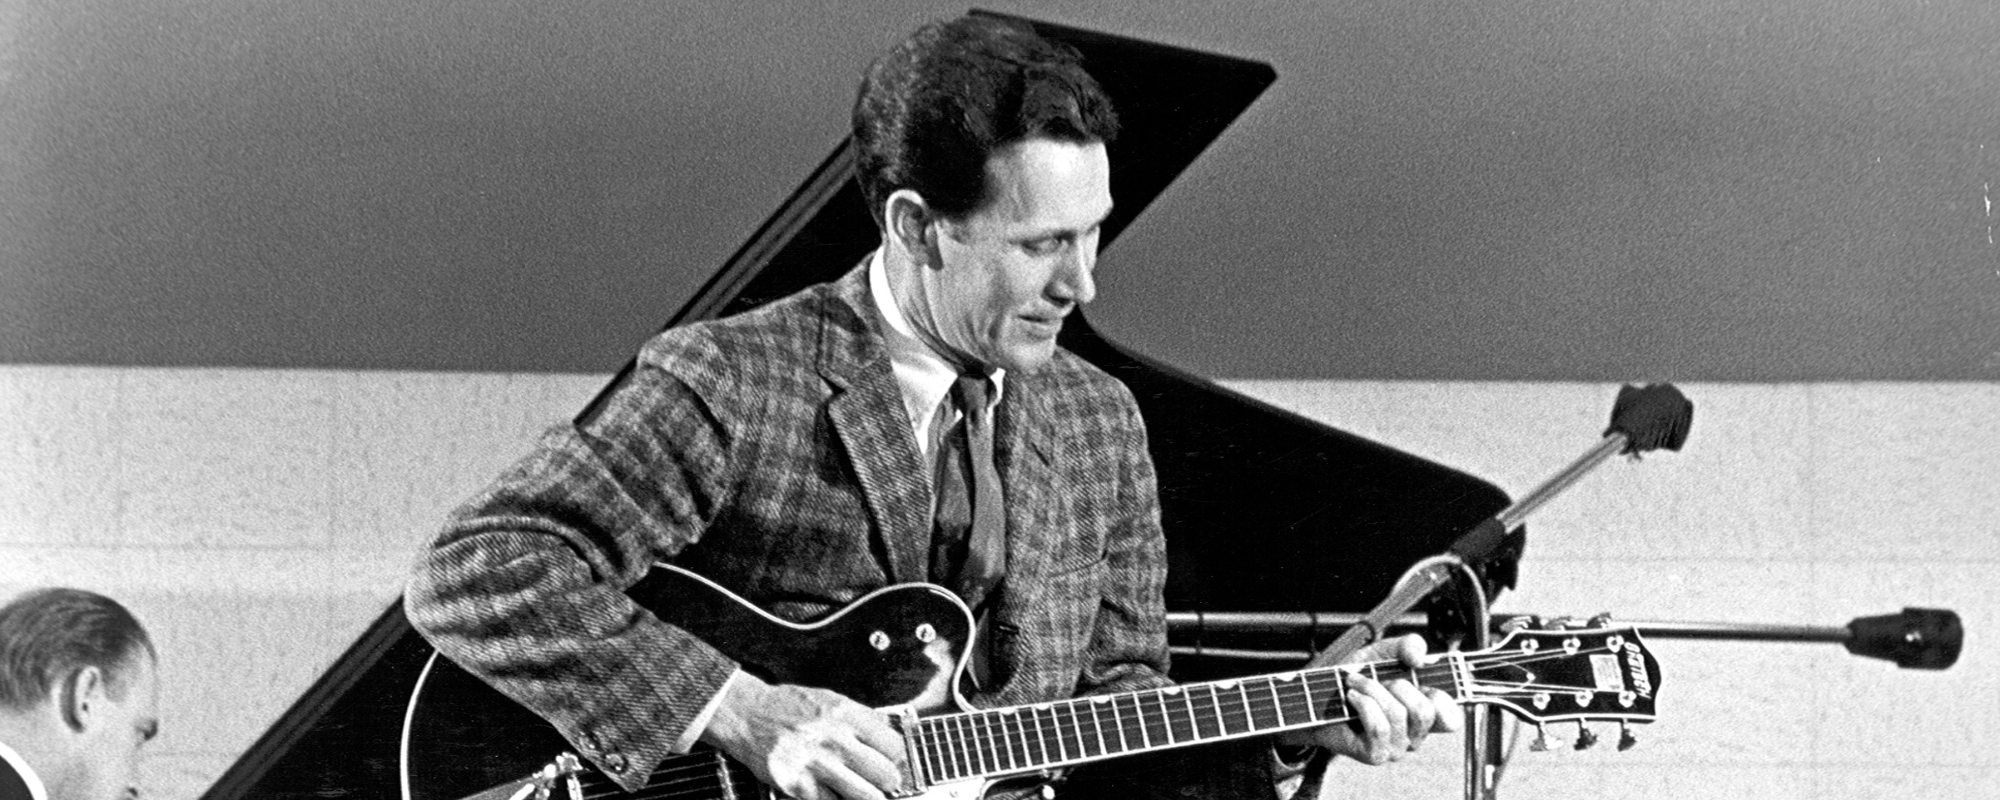 A Primer for the Country-Curious: 5 Fascinating Chet Atkins Facts